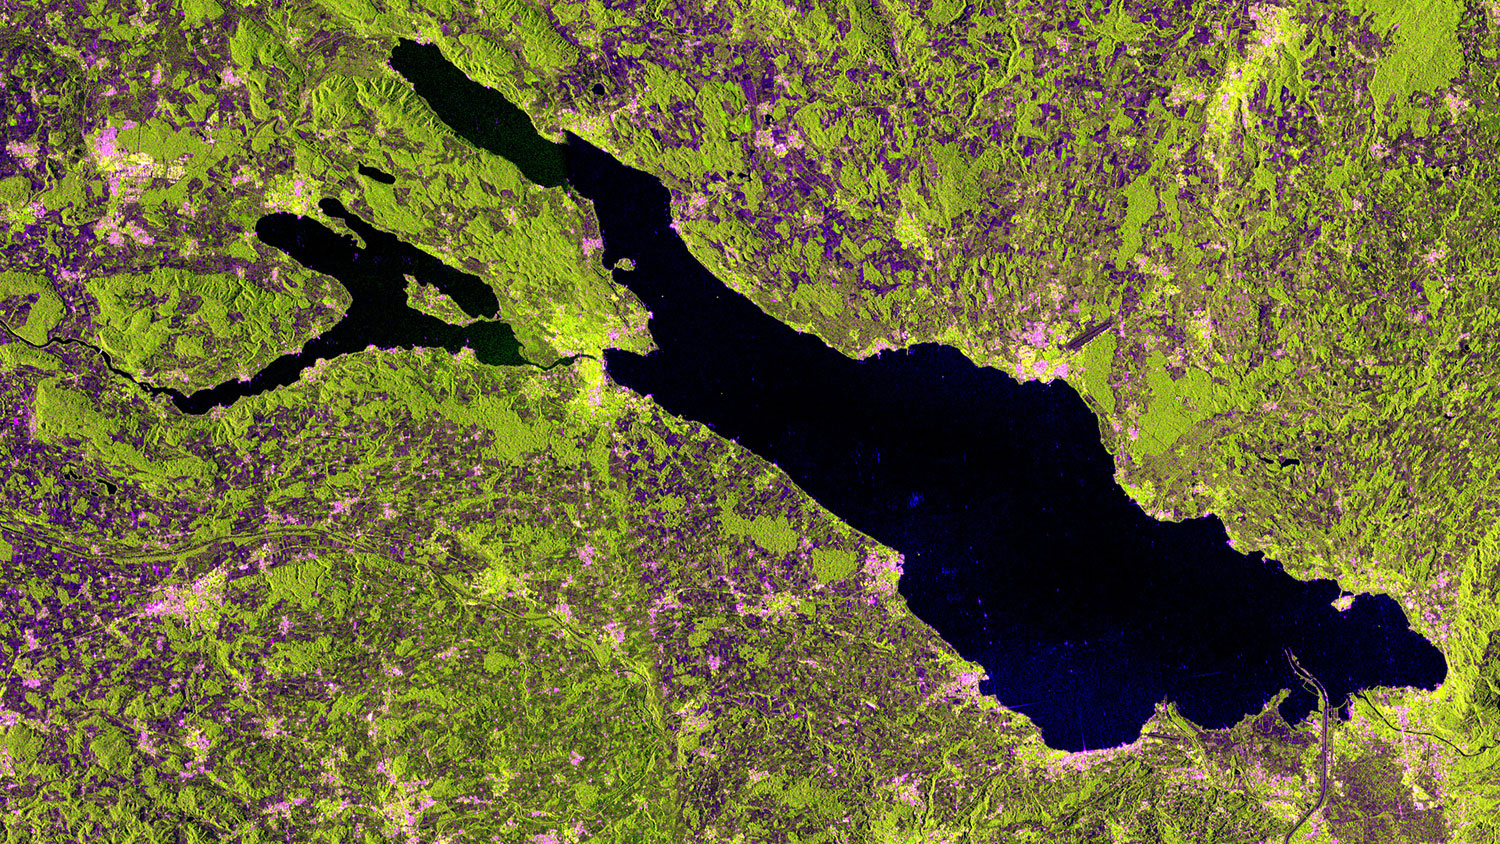 The freshwater Lake Constance in Central Europe captured by the Sentinel-1A satellite on May 10, 2014. Formed by the Rhine Glacier during the last Ice Age, it covers an area of about 540 sq km and is an important source of drinking water for southwestern Germany.